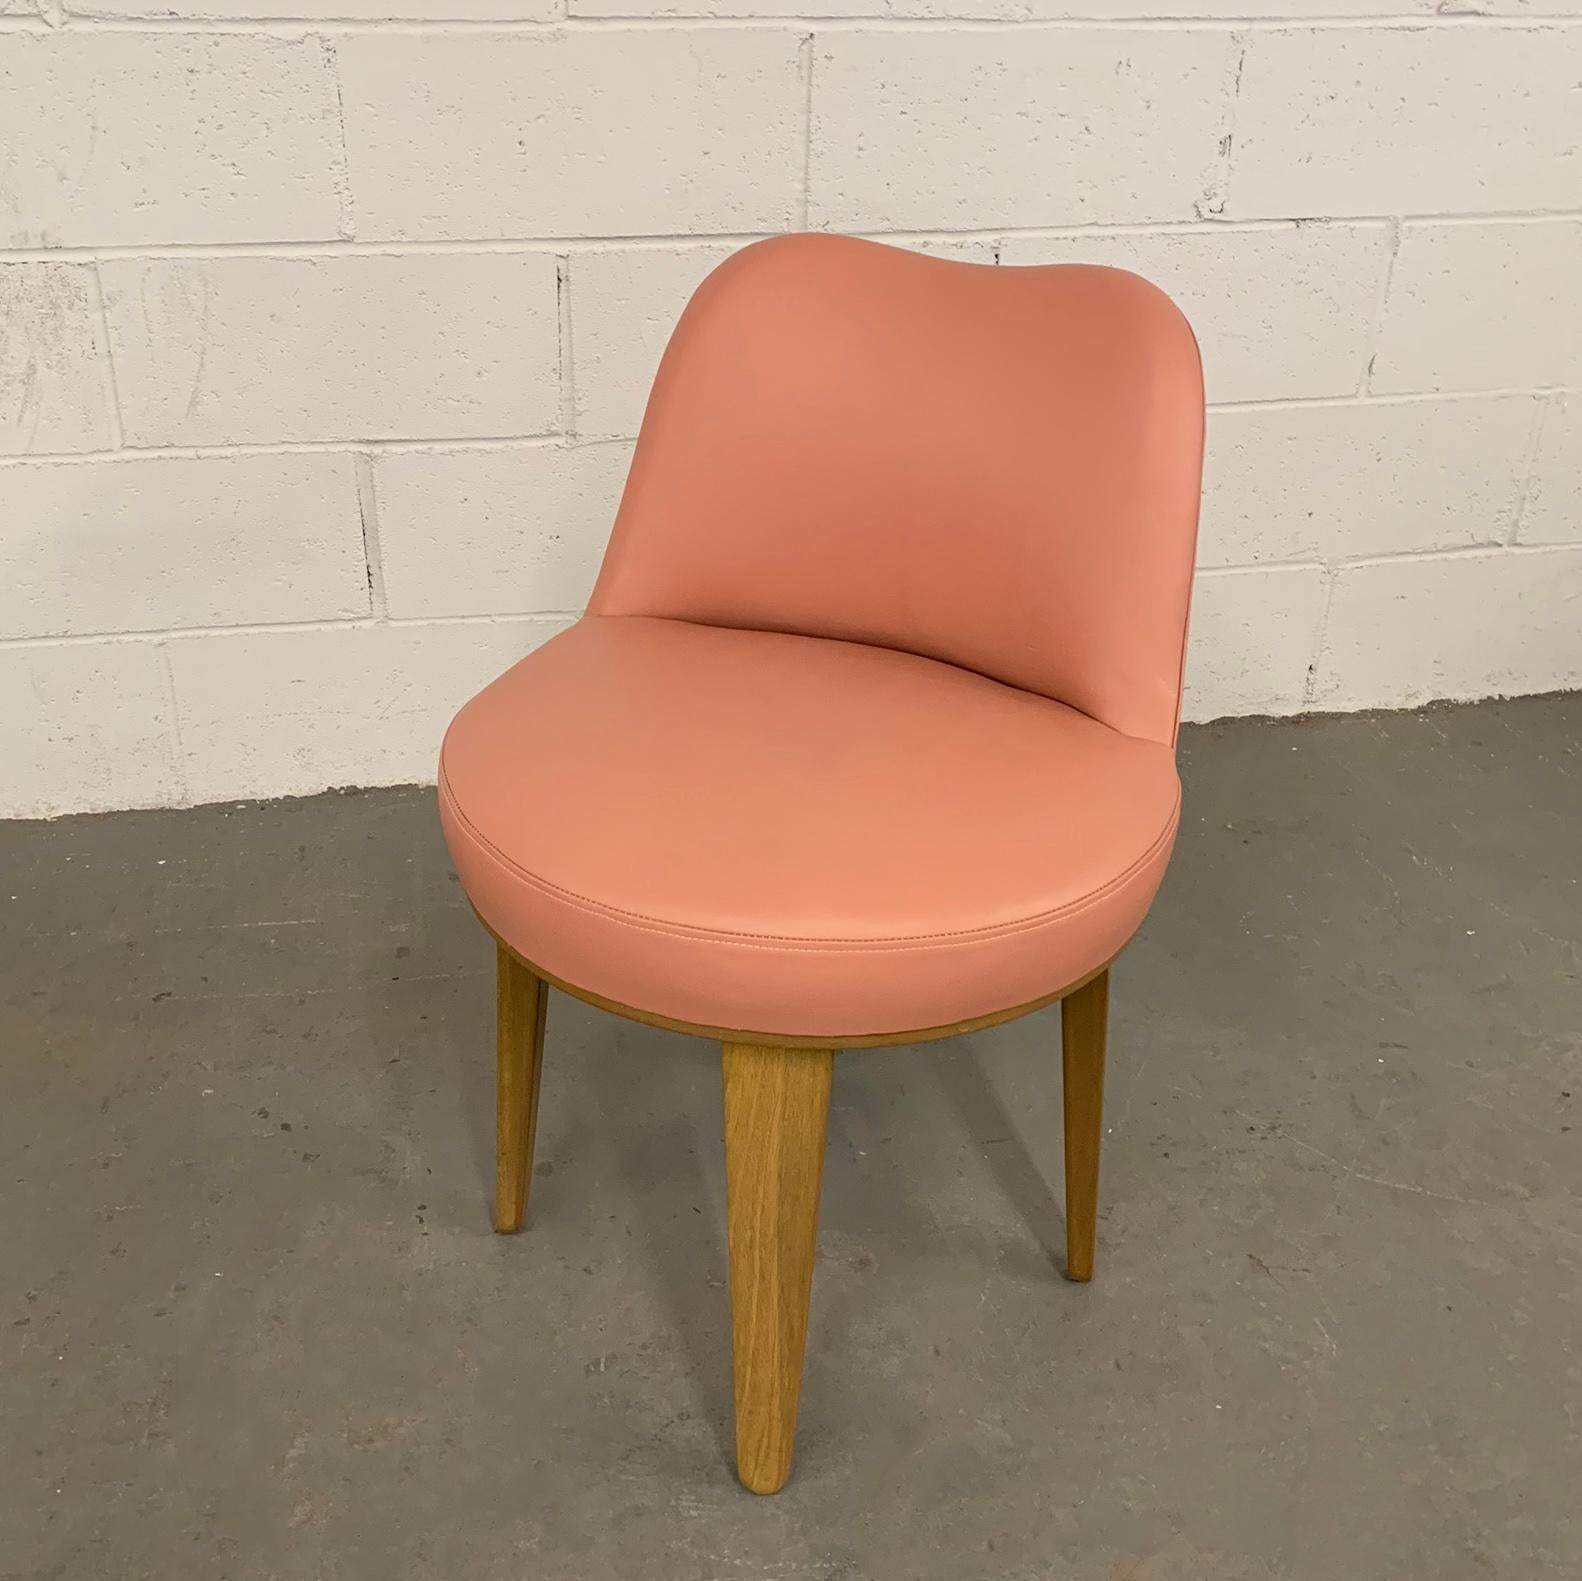 Petite, swivel, pickled mahogany, vanity chair by Edward Wormley for Dunbar is newly upholstered in dusty pink leather. The chair is shown with an Edward Wormley vanity desk that is listed separately.